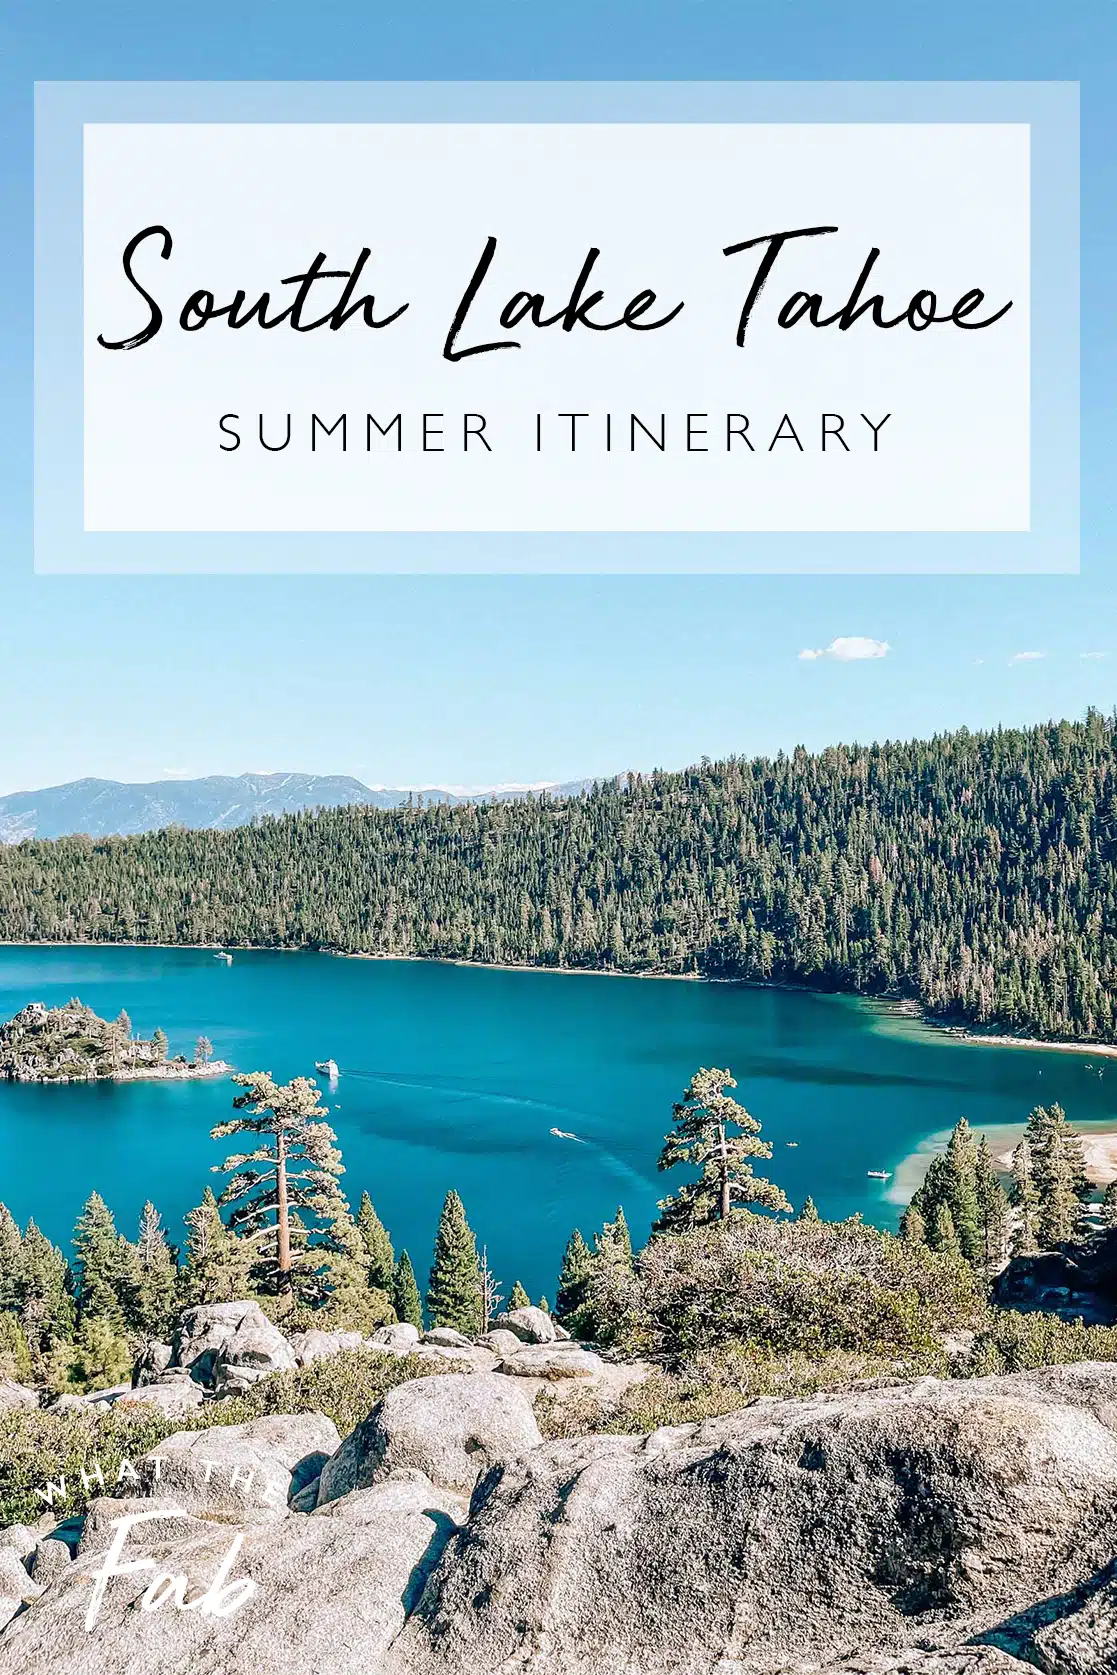 Find a Travel Buddy in South Lake Tahoe, Share Costs, & Travel Together